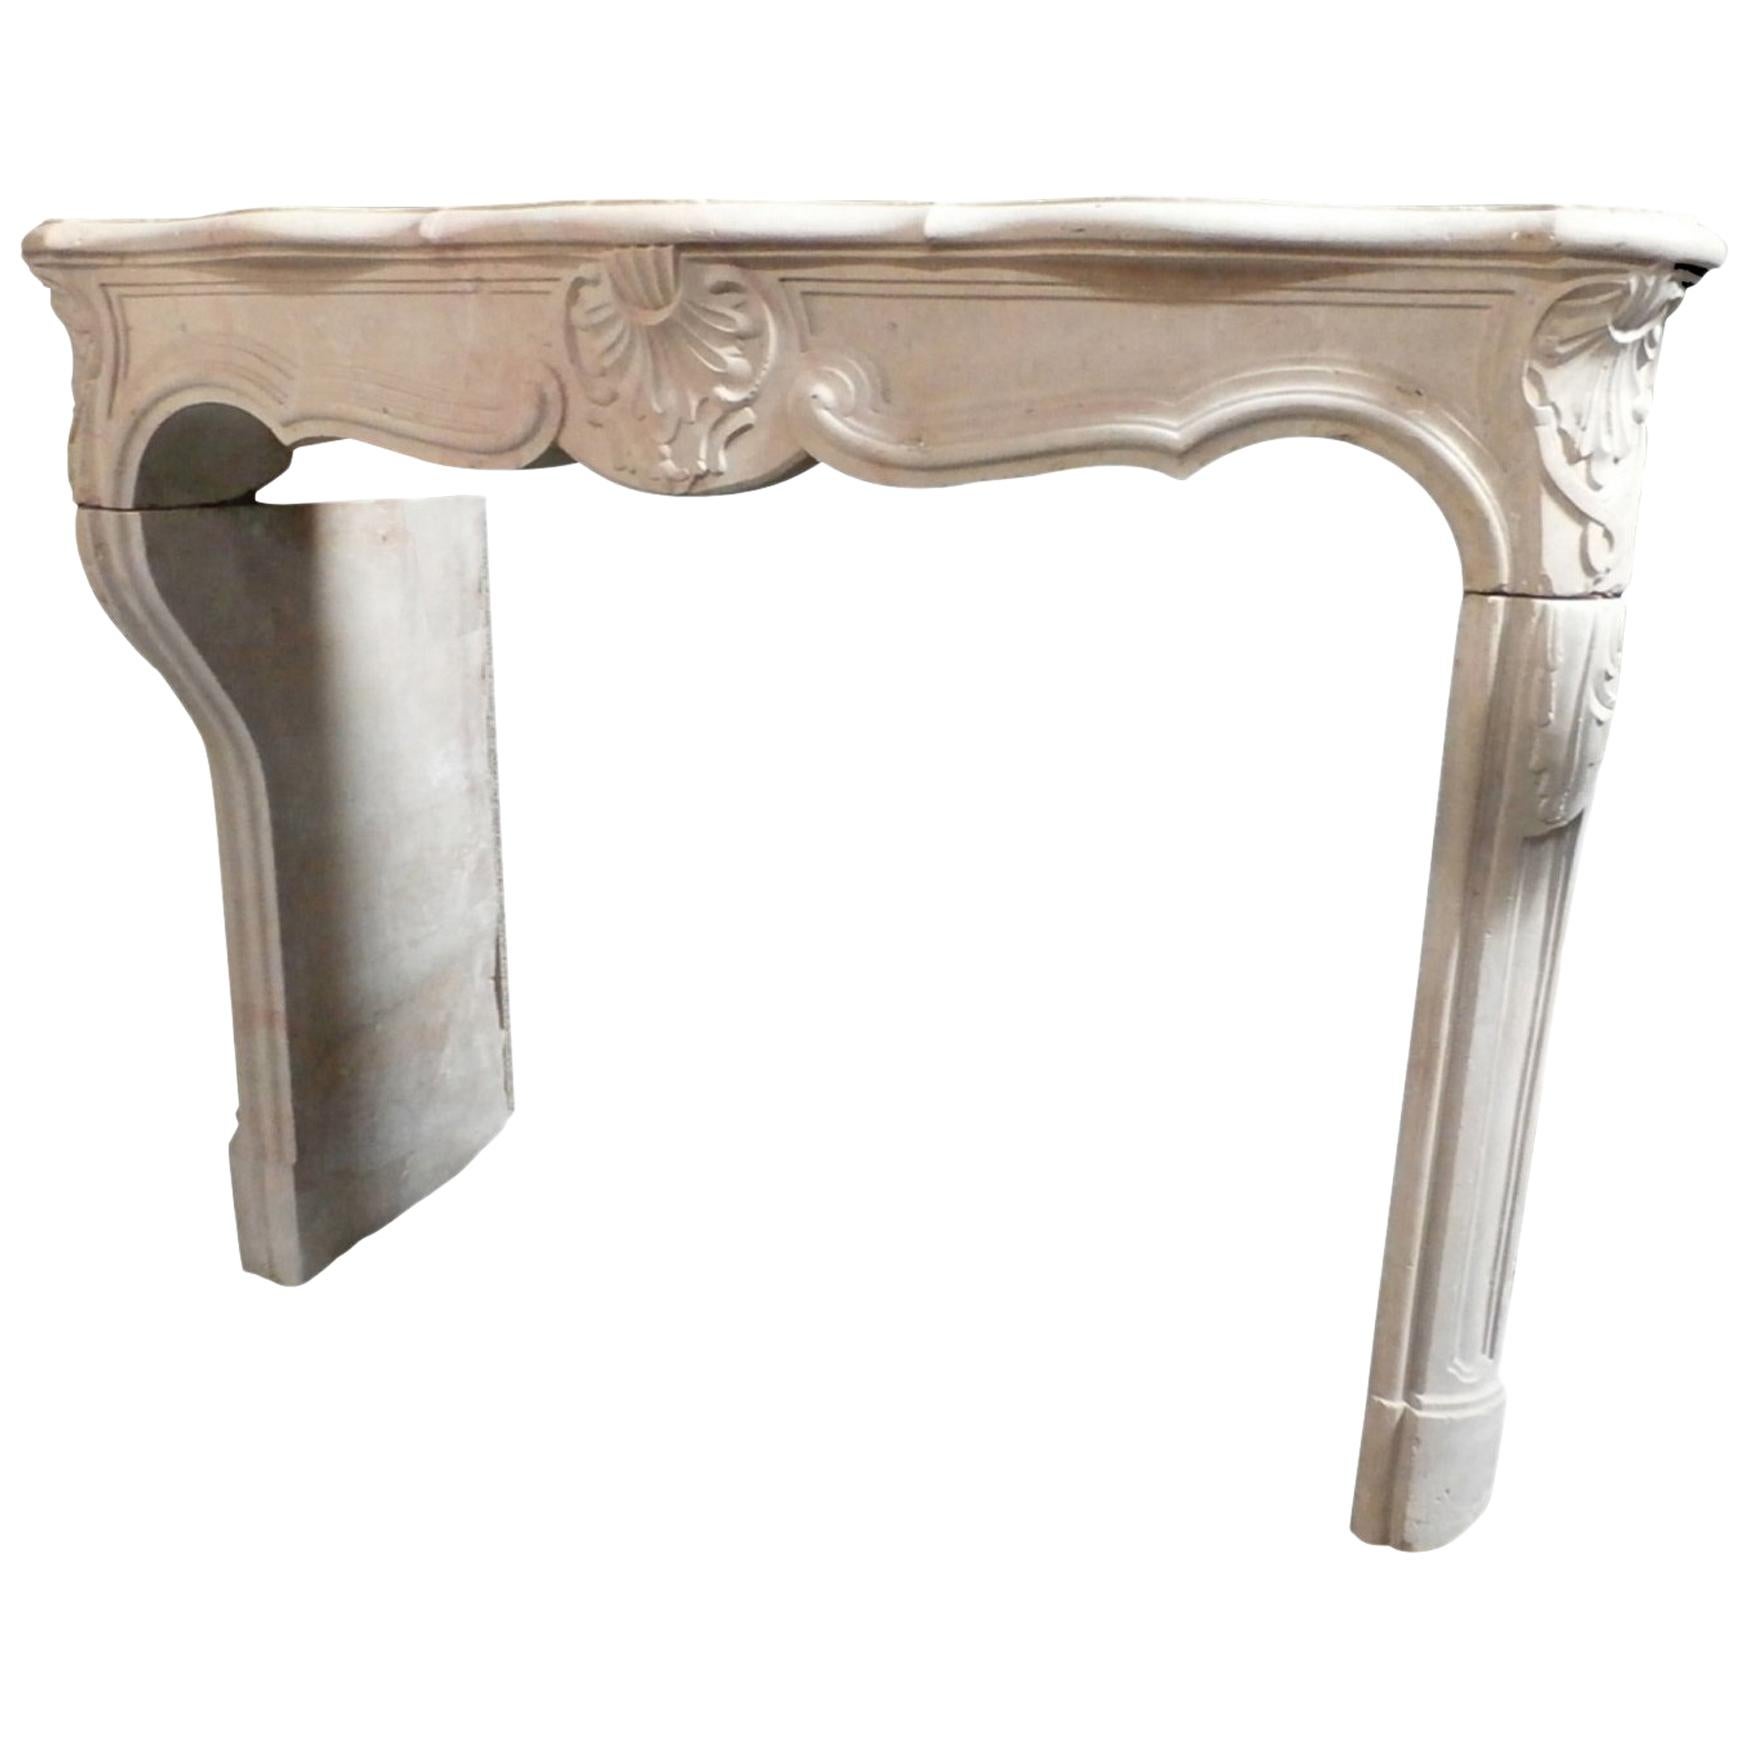 Decorative Fireplace Mantel in the Style of Louis XV For Sale